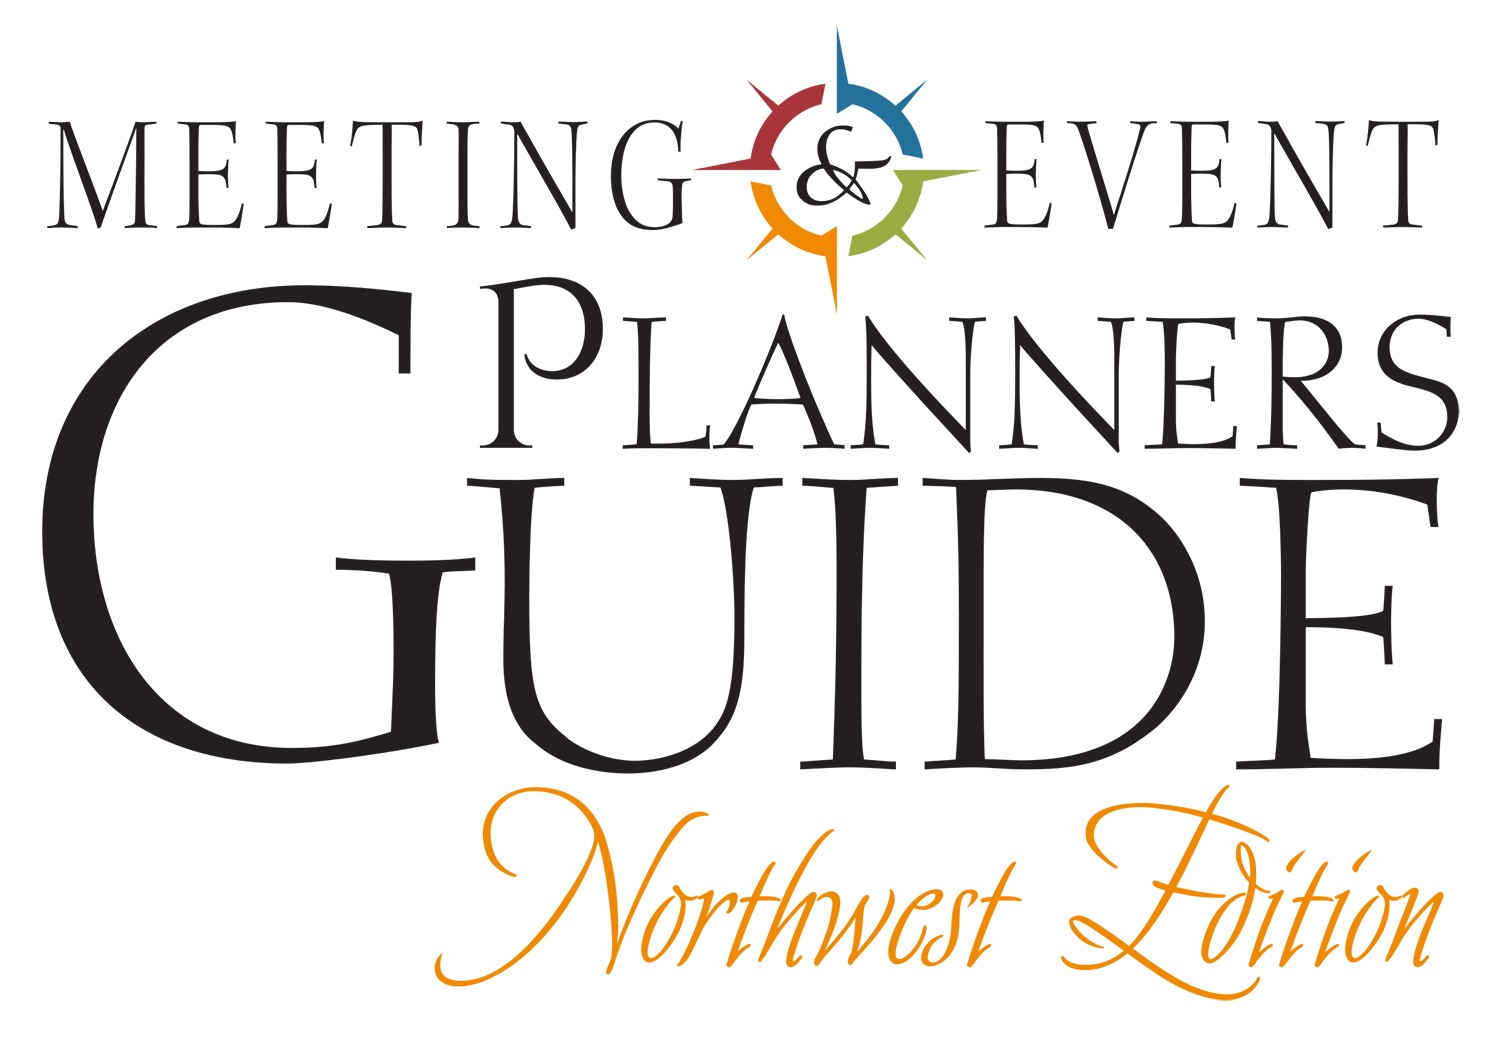 Meeting & Event Planners Guide